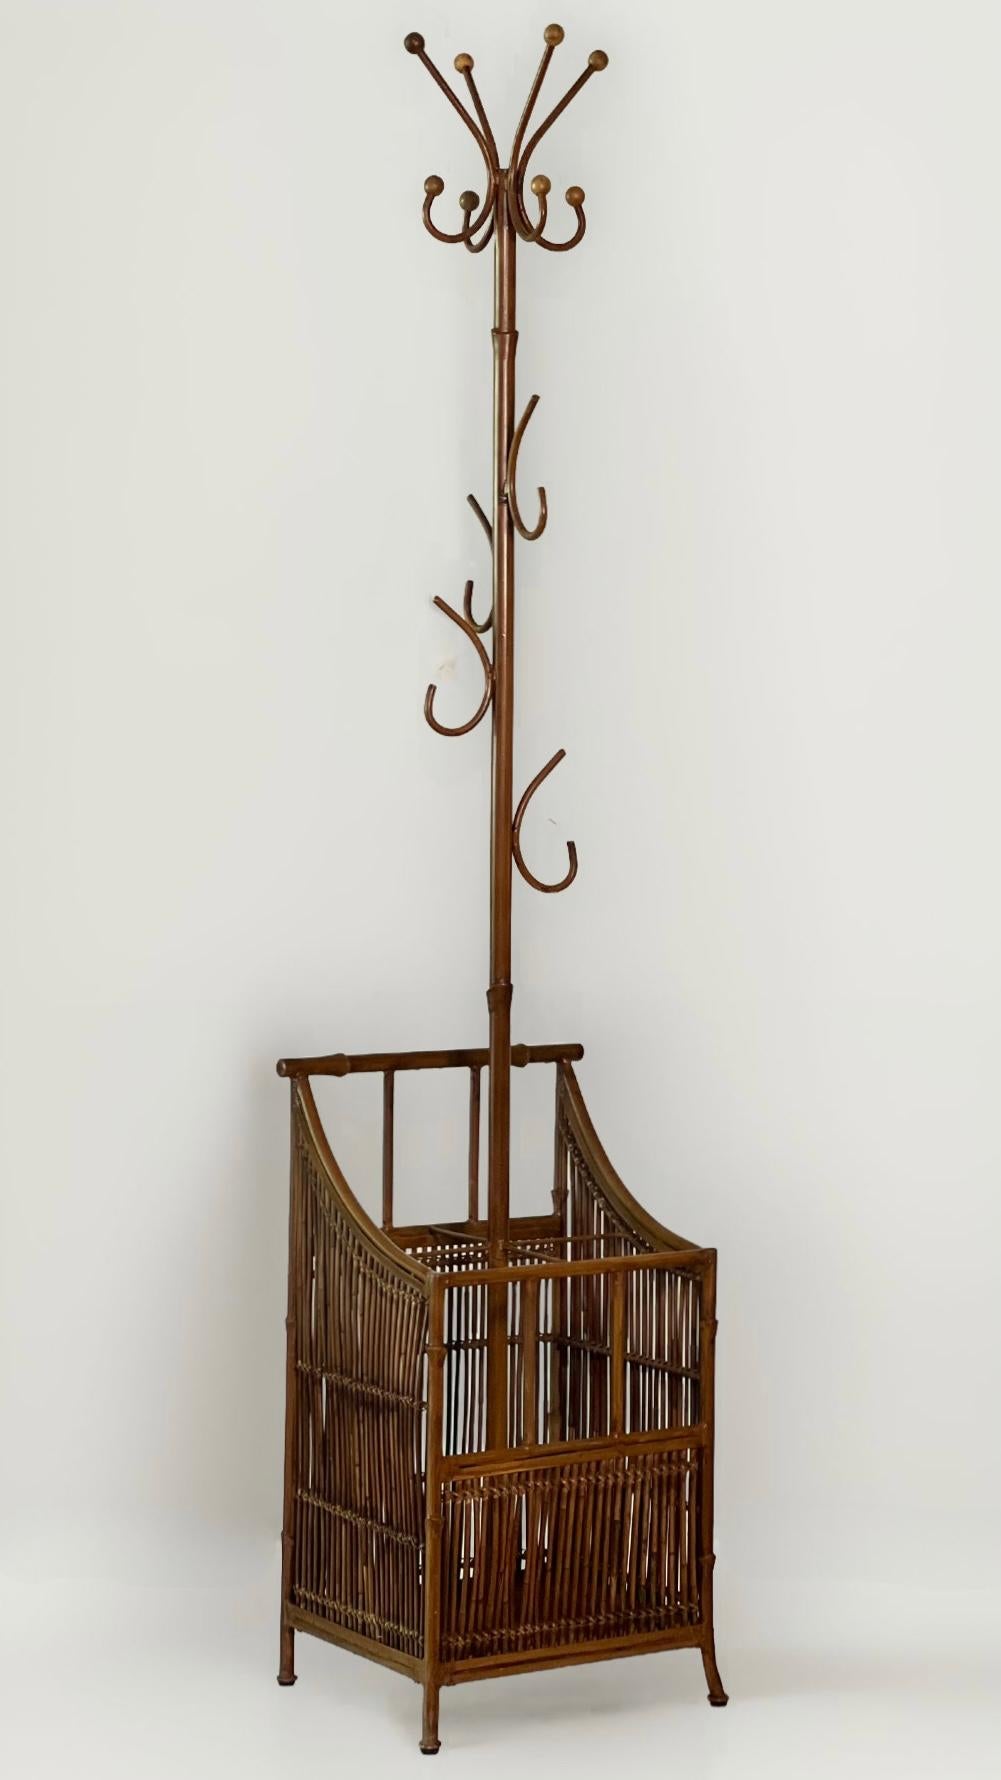 Natural and faux bamboo hall tree coat and umbrella stand, attributed to Maitland Smith, c. 1980s.

High quality double stand with a sturdy faux bamboo painted metal frame and a natural bamboo lower portion for umbrellas/canes secured by rattan. 